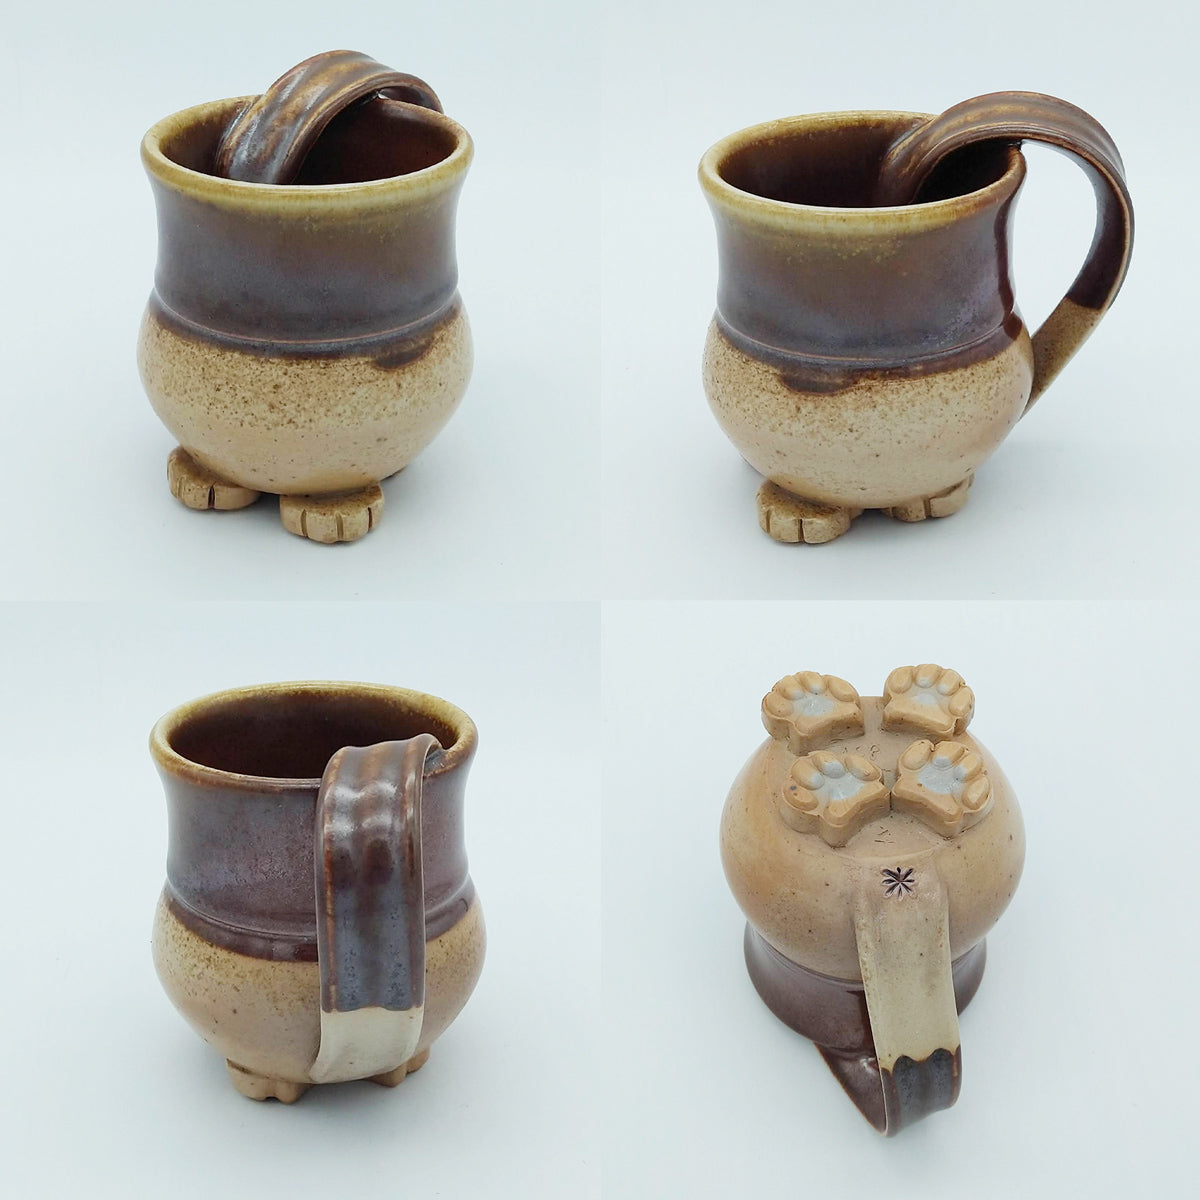 Small Salt or Soda Fired Cat Butt Mugs - approx. 8 to 9 oz